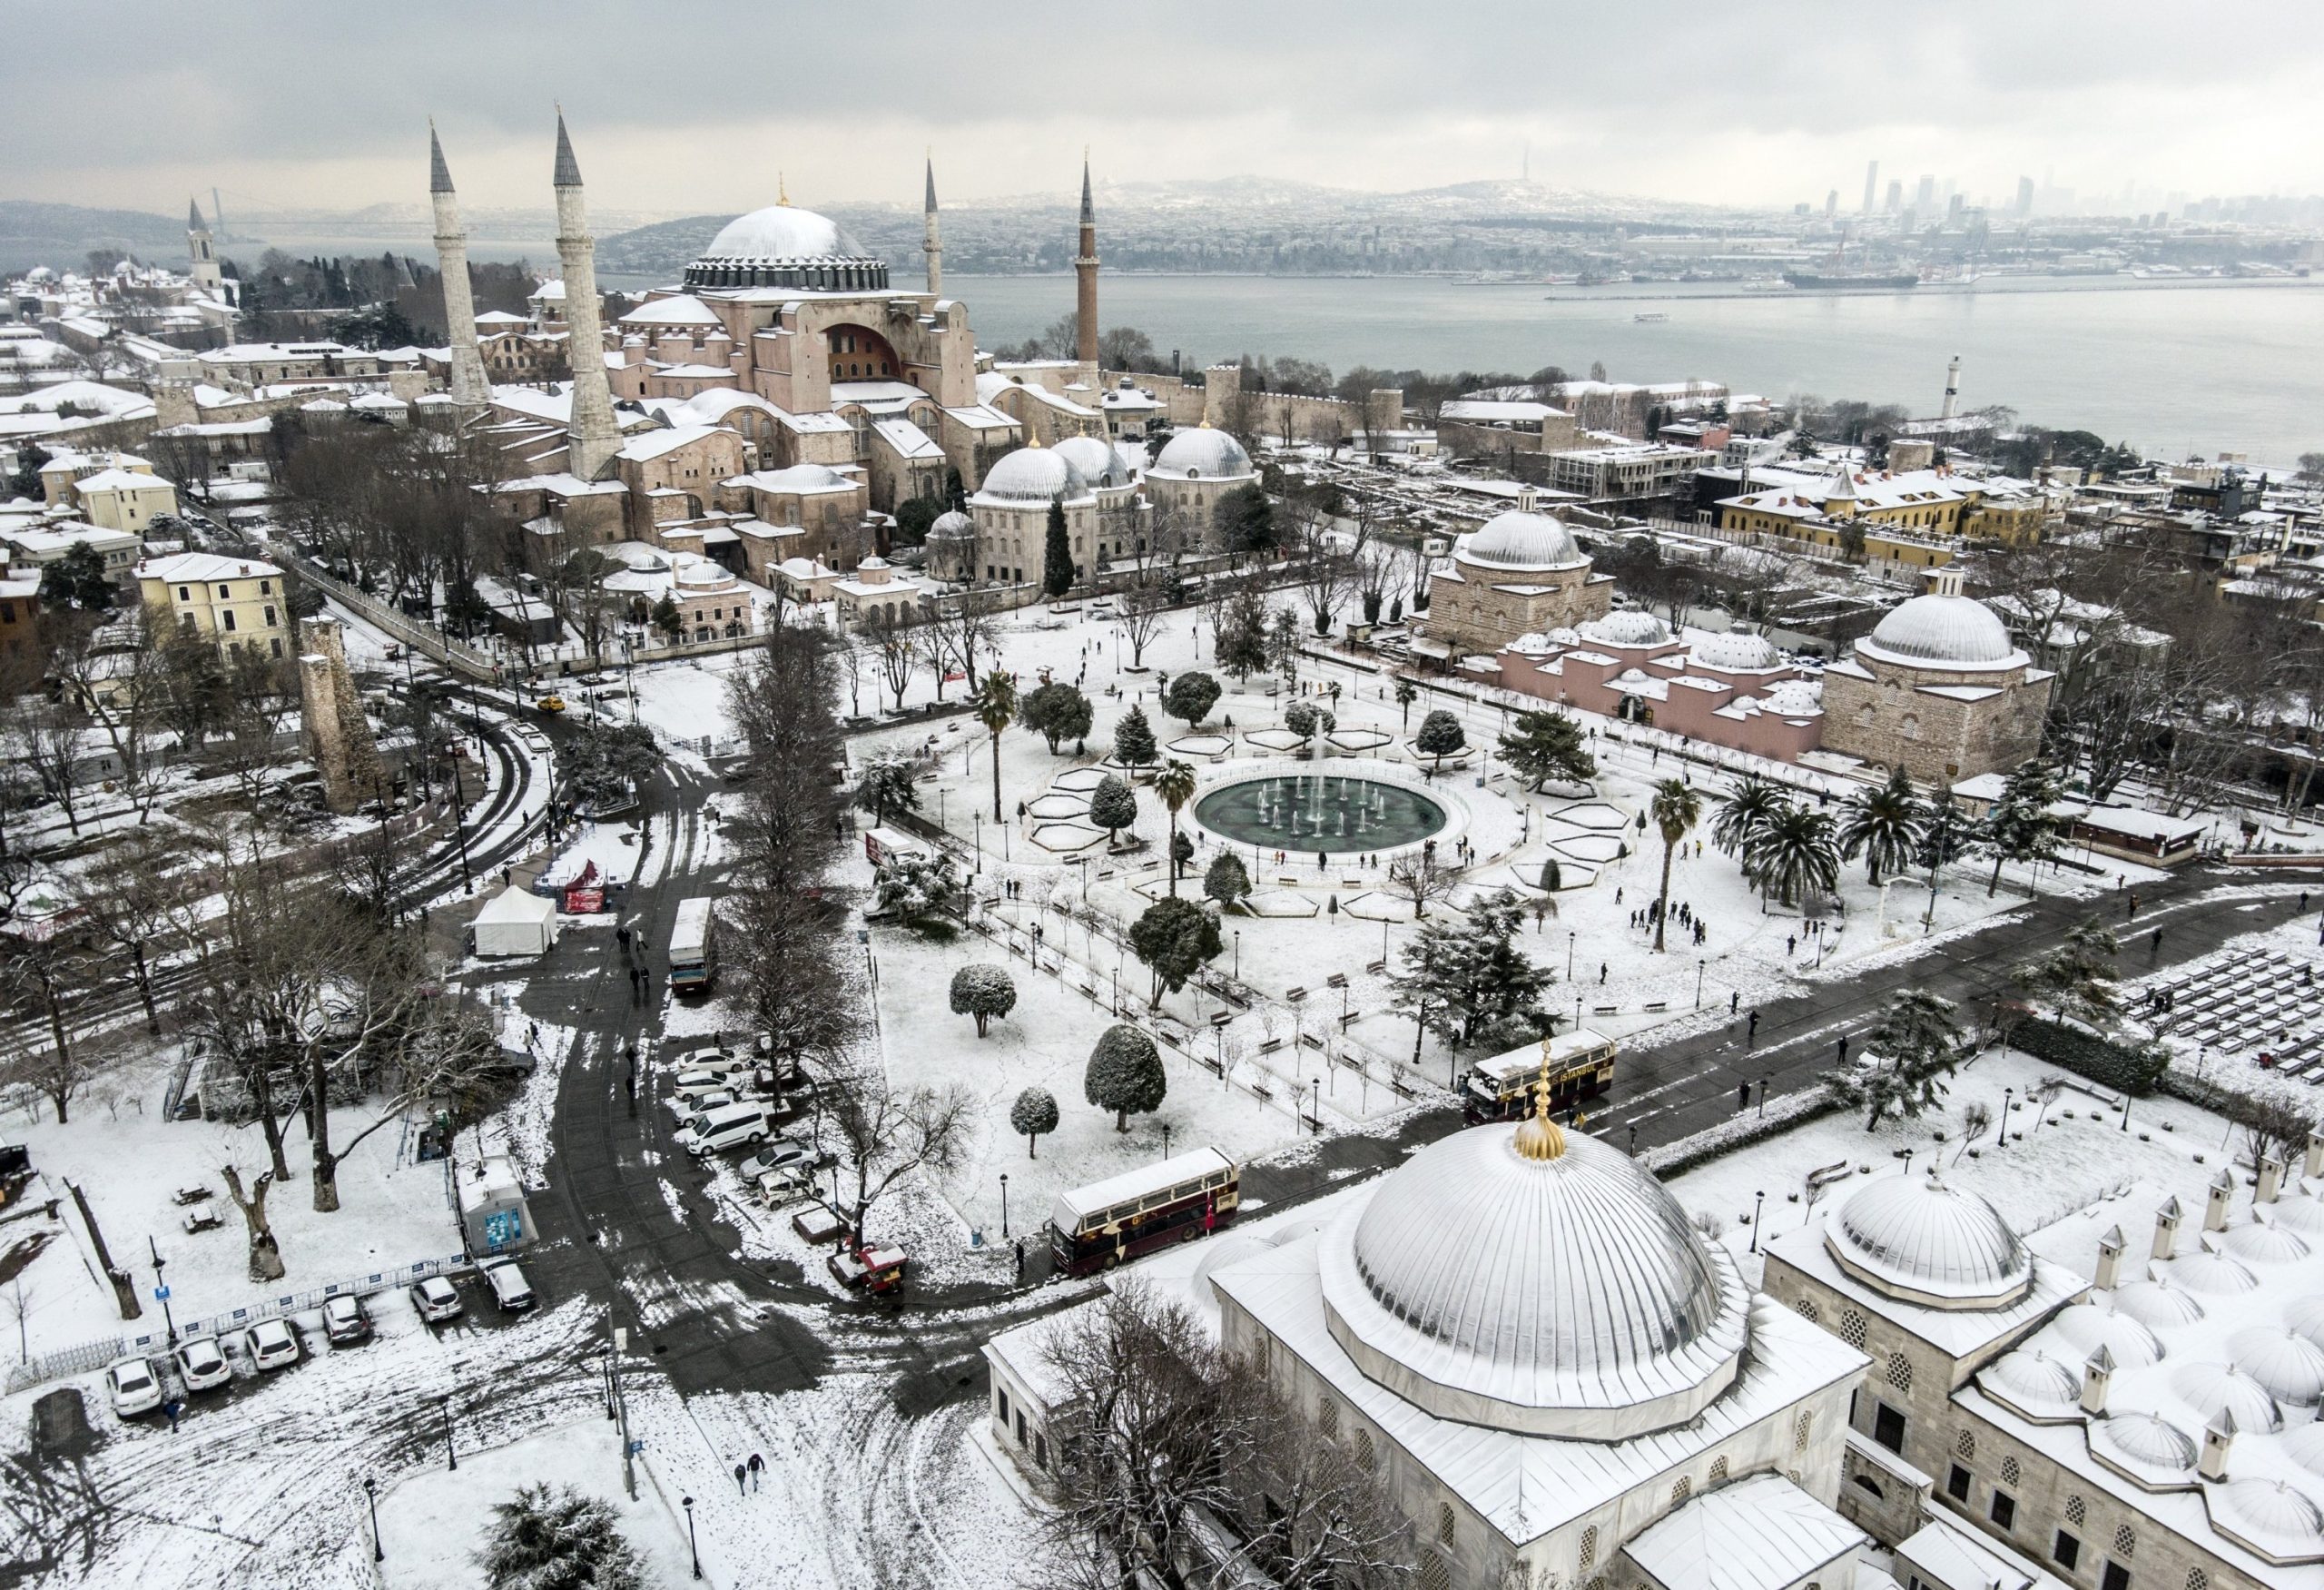 Over 200 flights cancelled in İstanbul because of snow 2